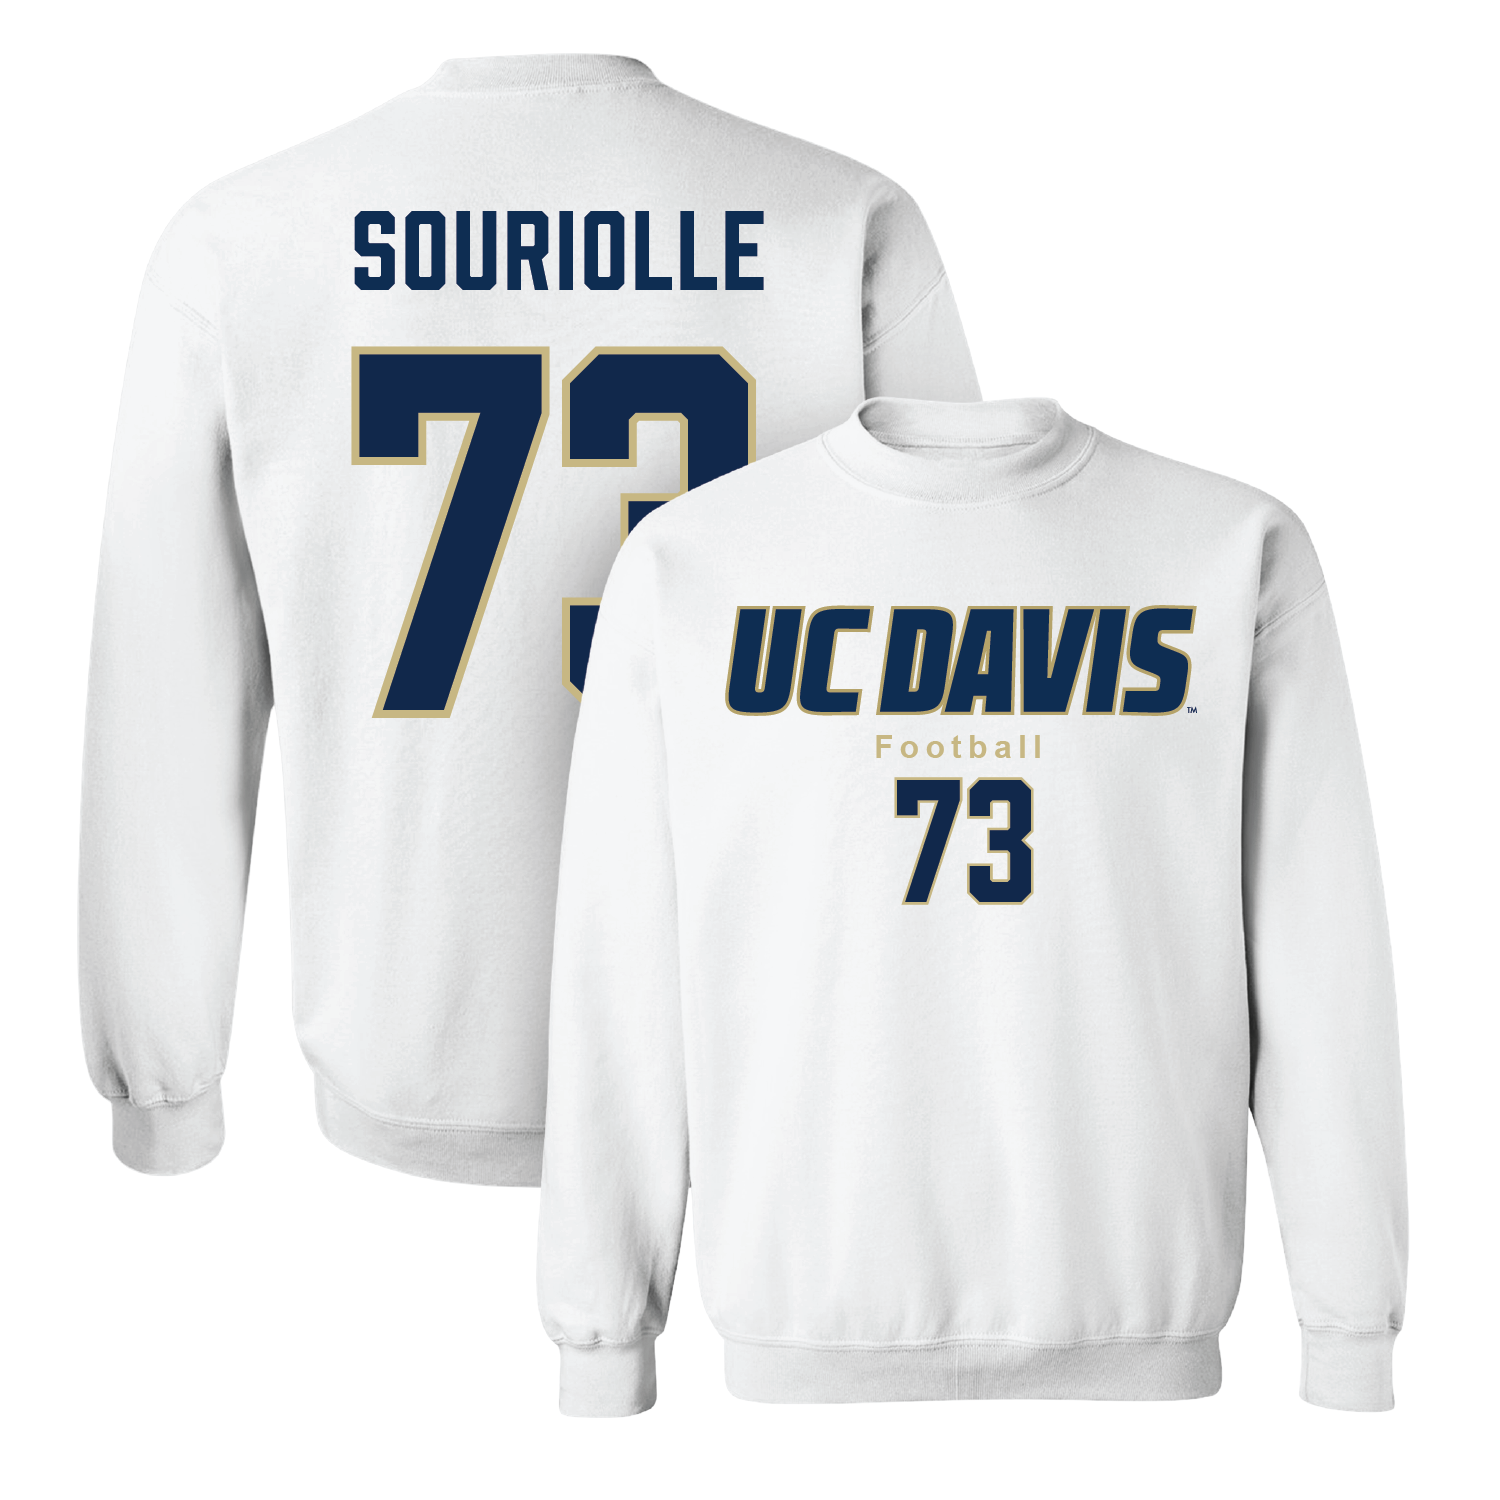 White Football Classic Crew 3 Youth Small / Izaiah Souriolle | #73